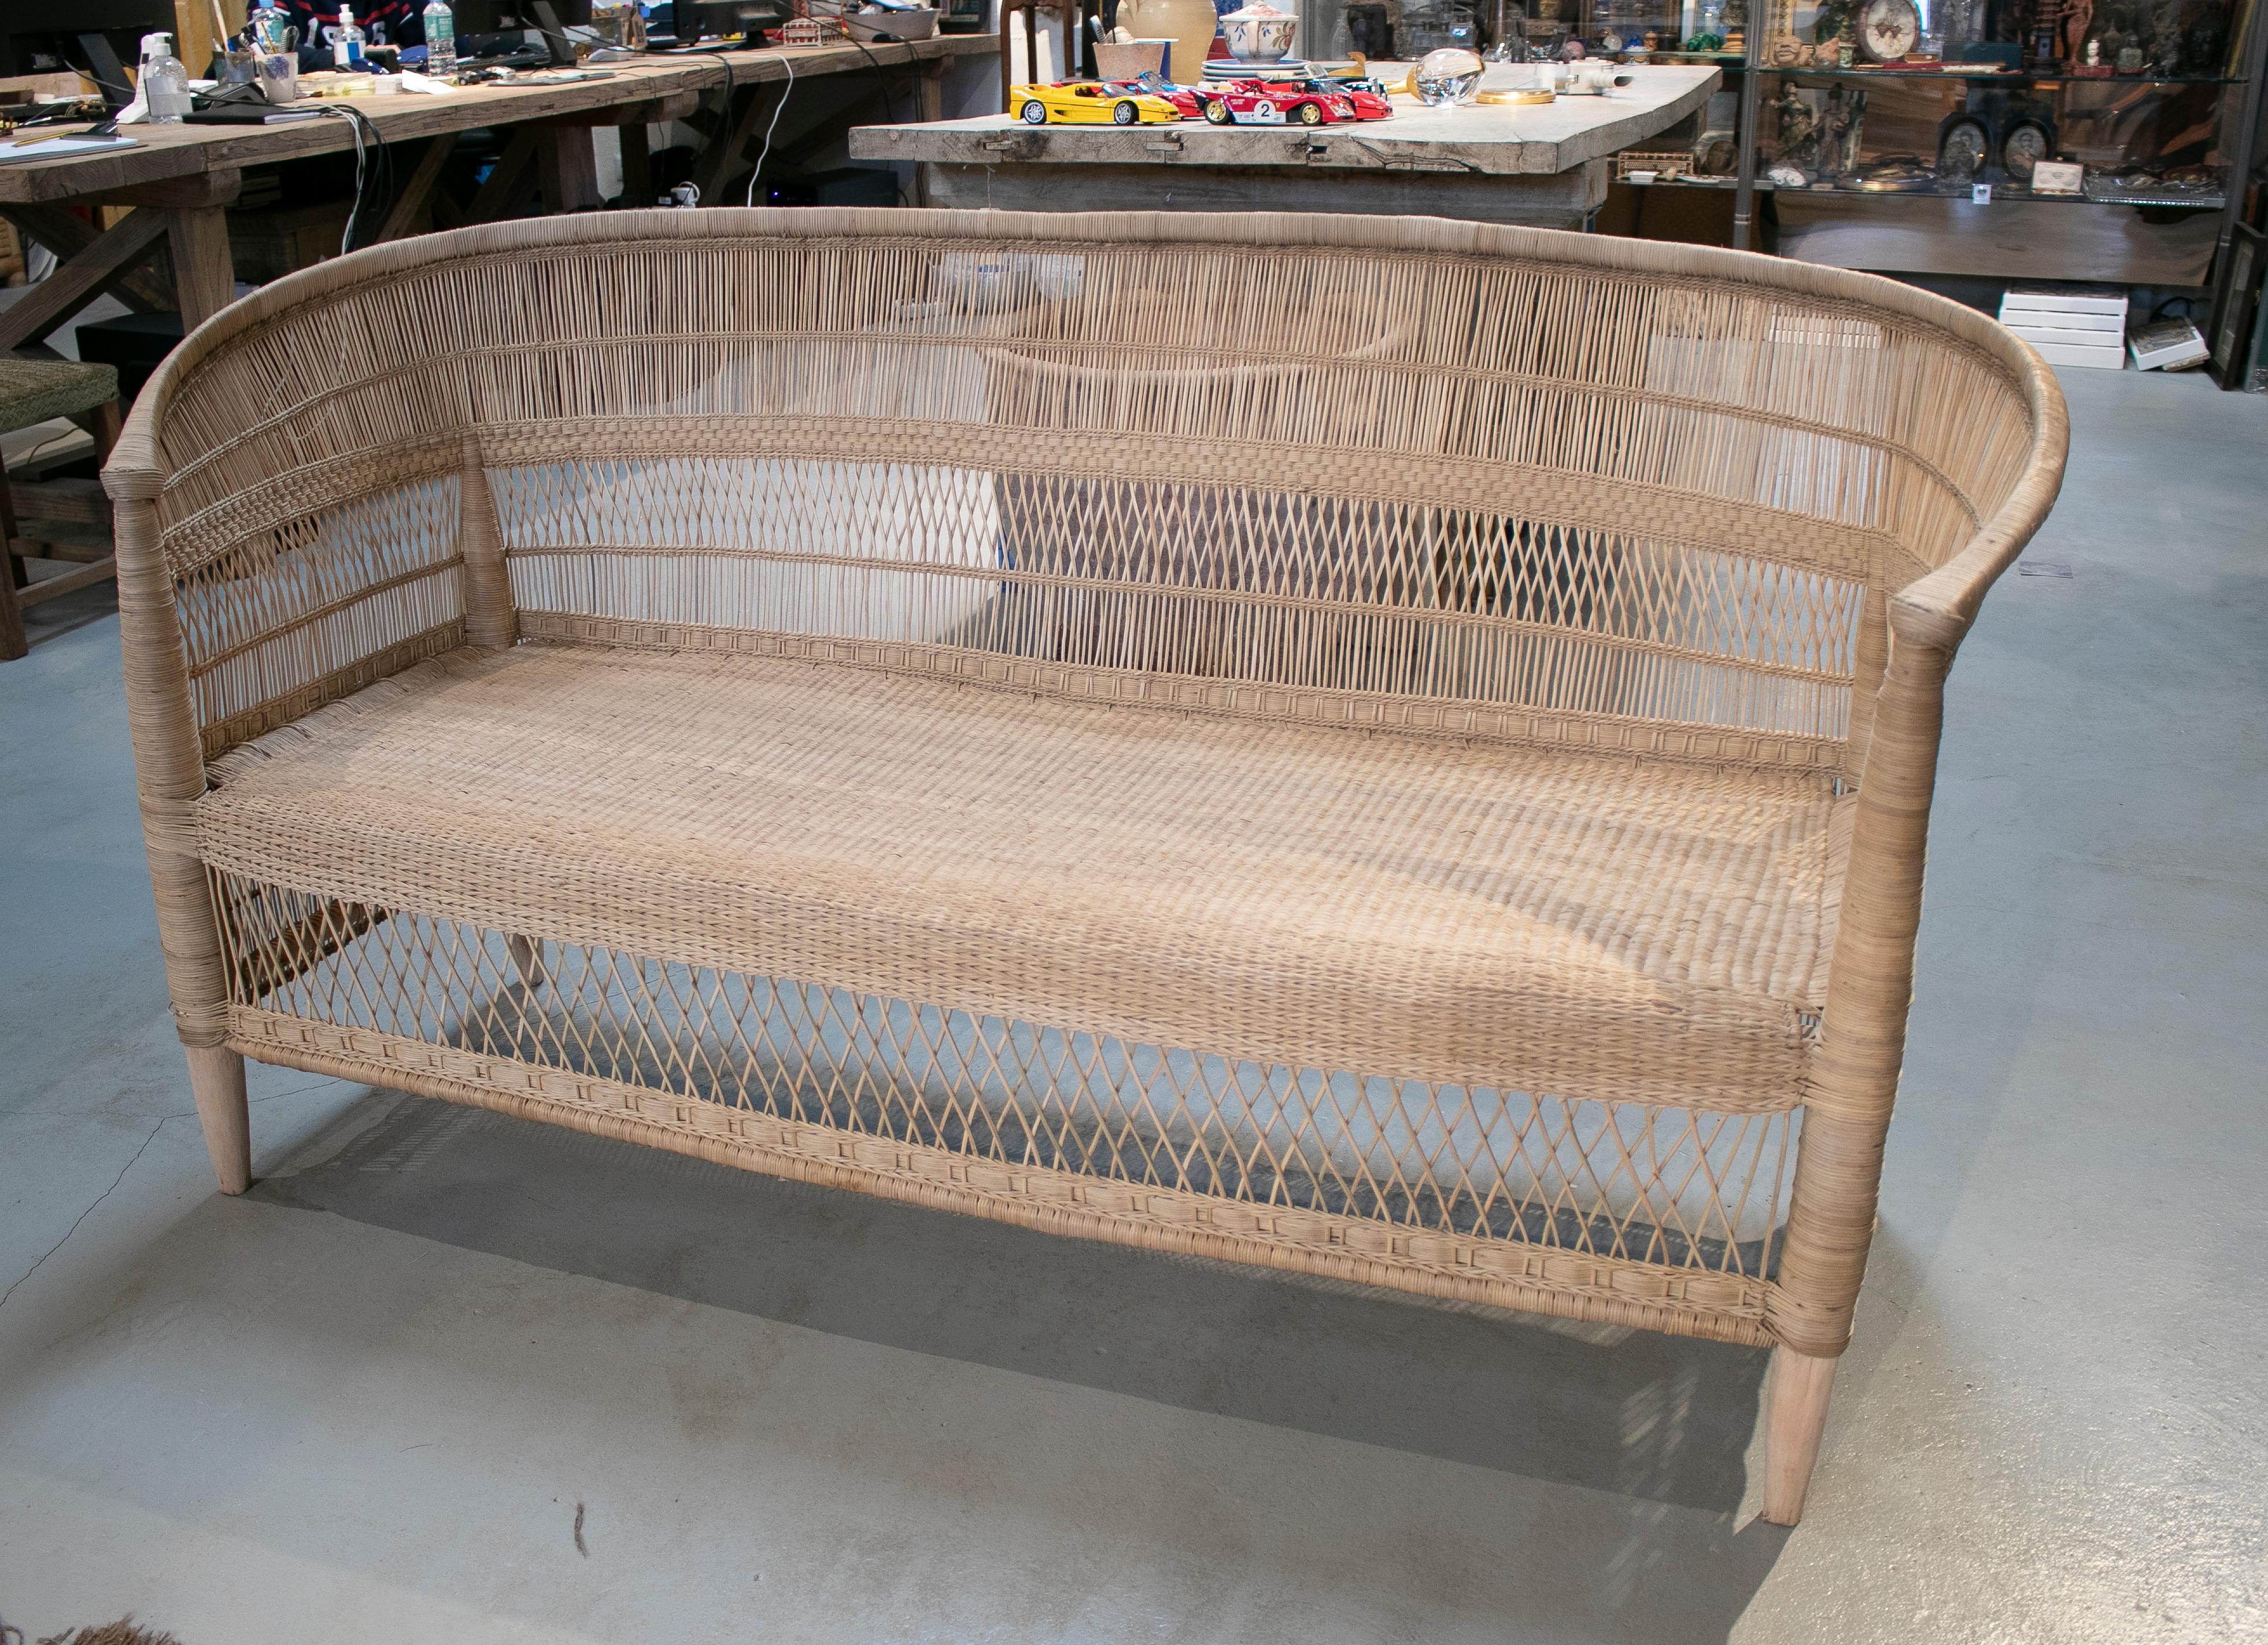 House and garden hand woven rattan sofa with wooden structure.